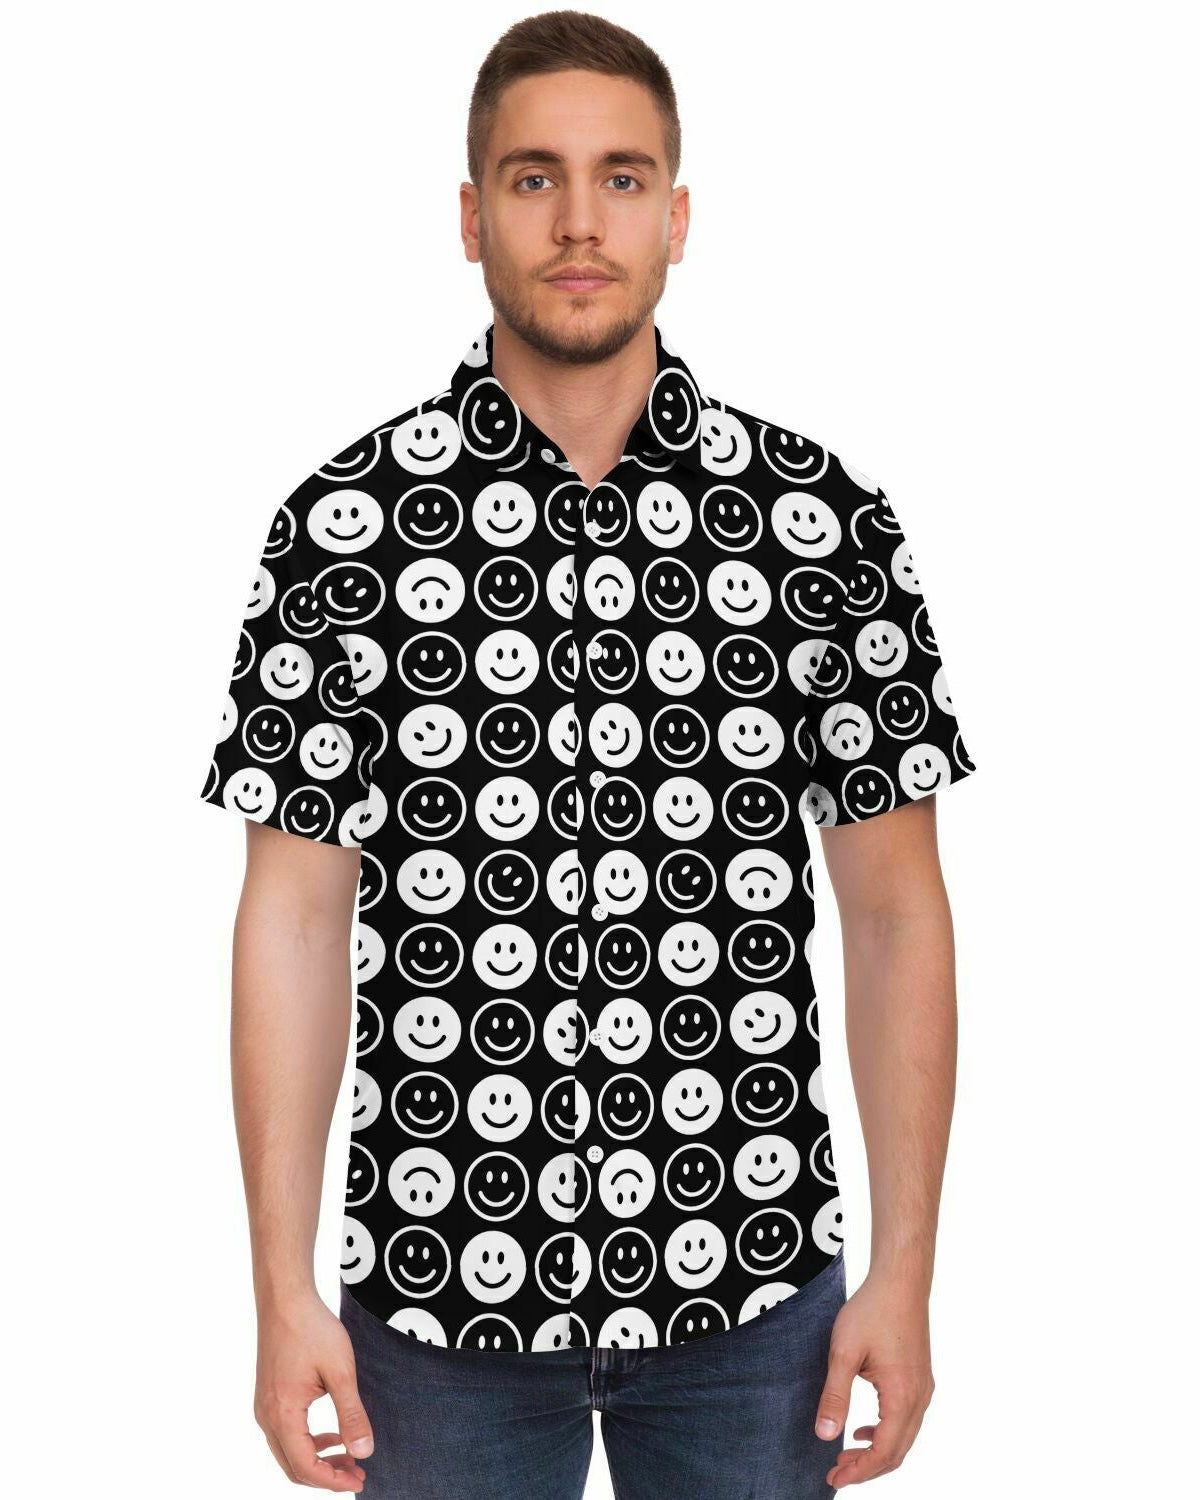 All Smiles Party Shirt, Short Sleeve Button Down Shirt, - One Stop Rave